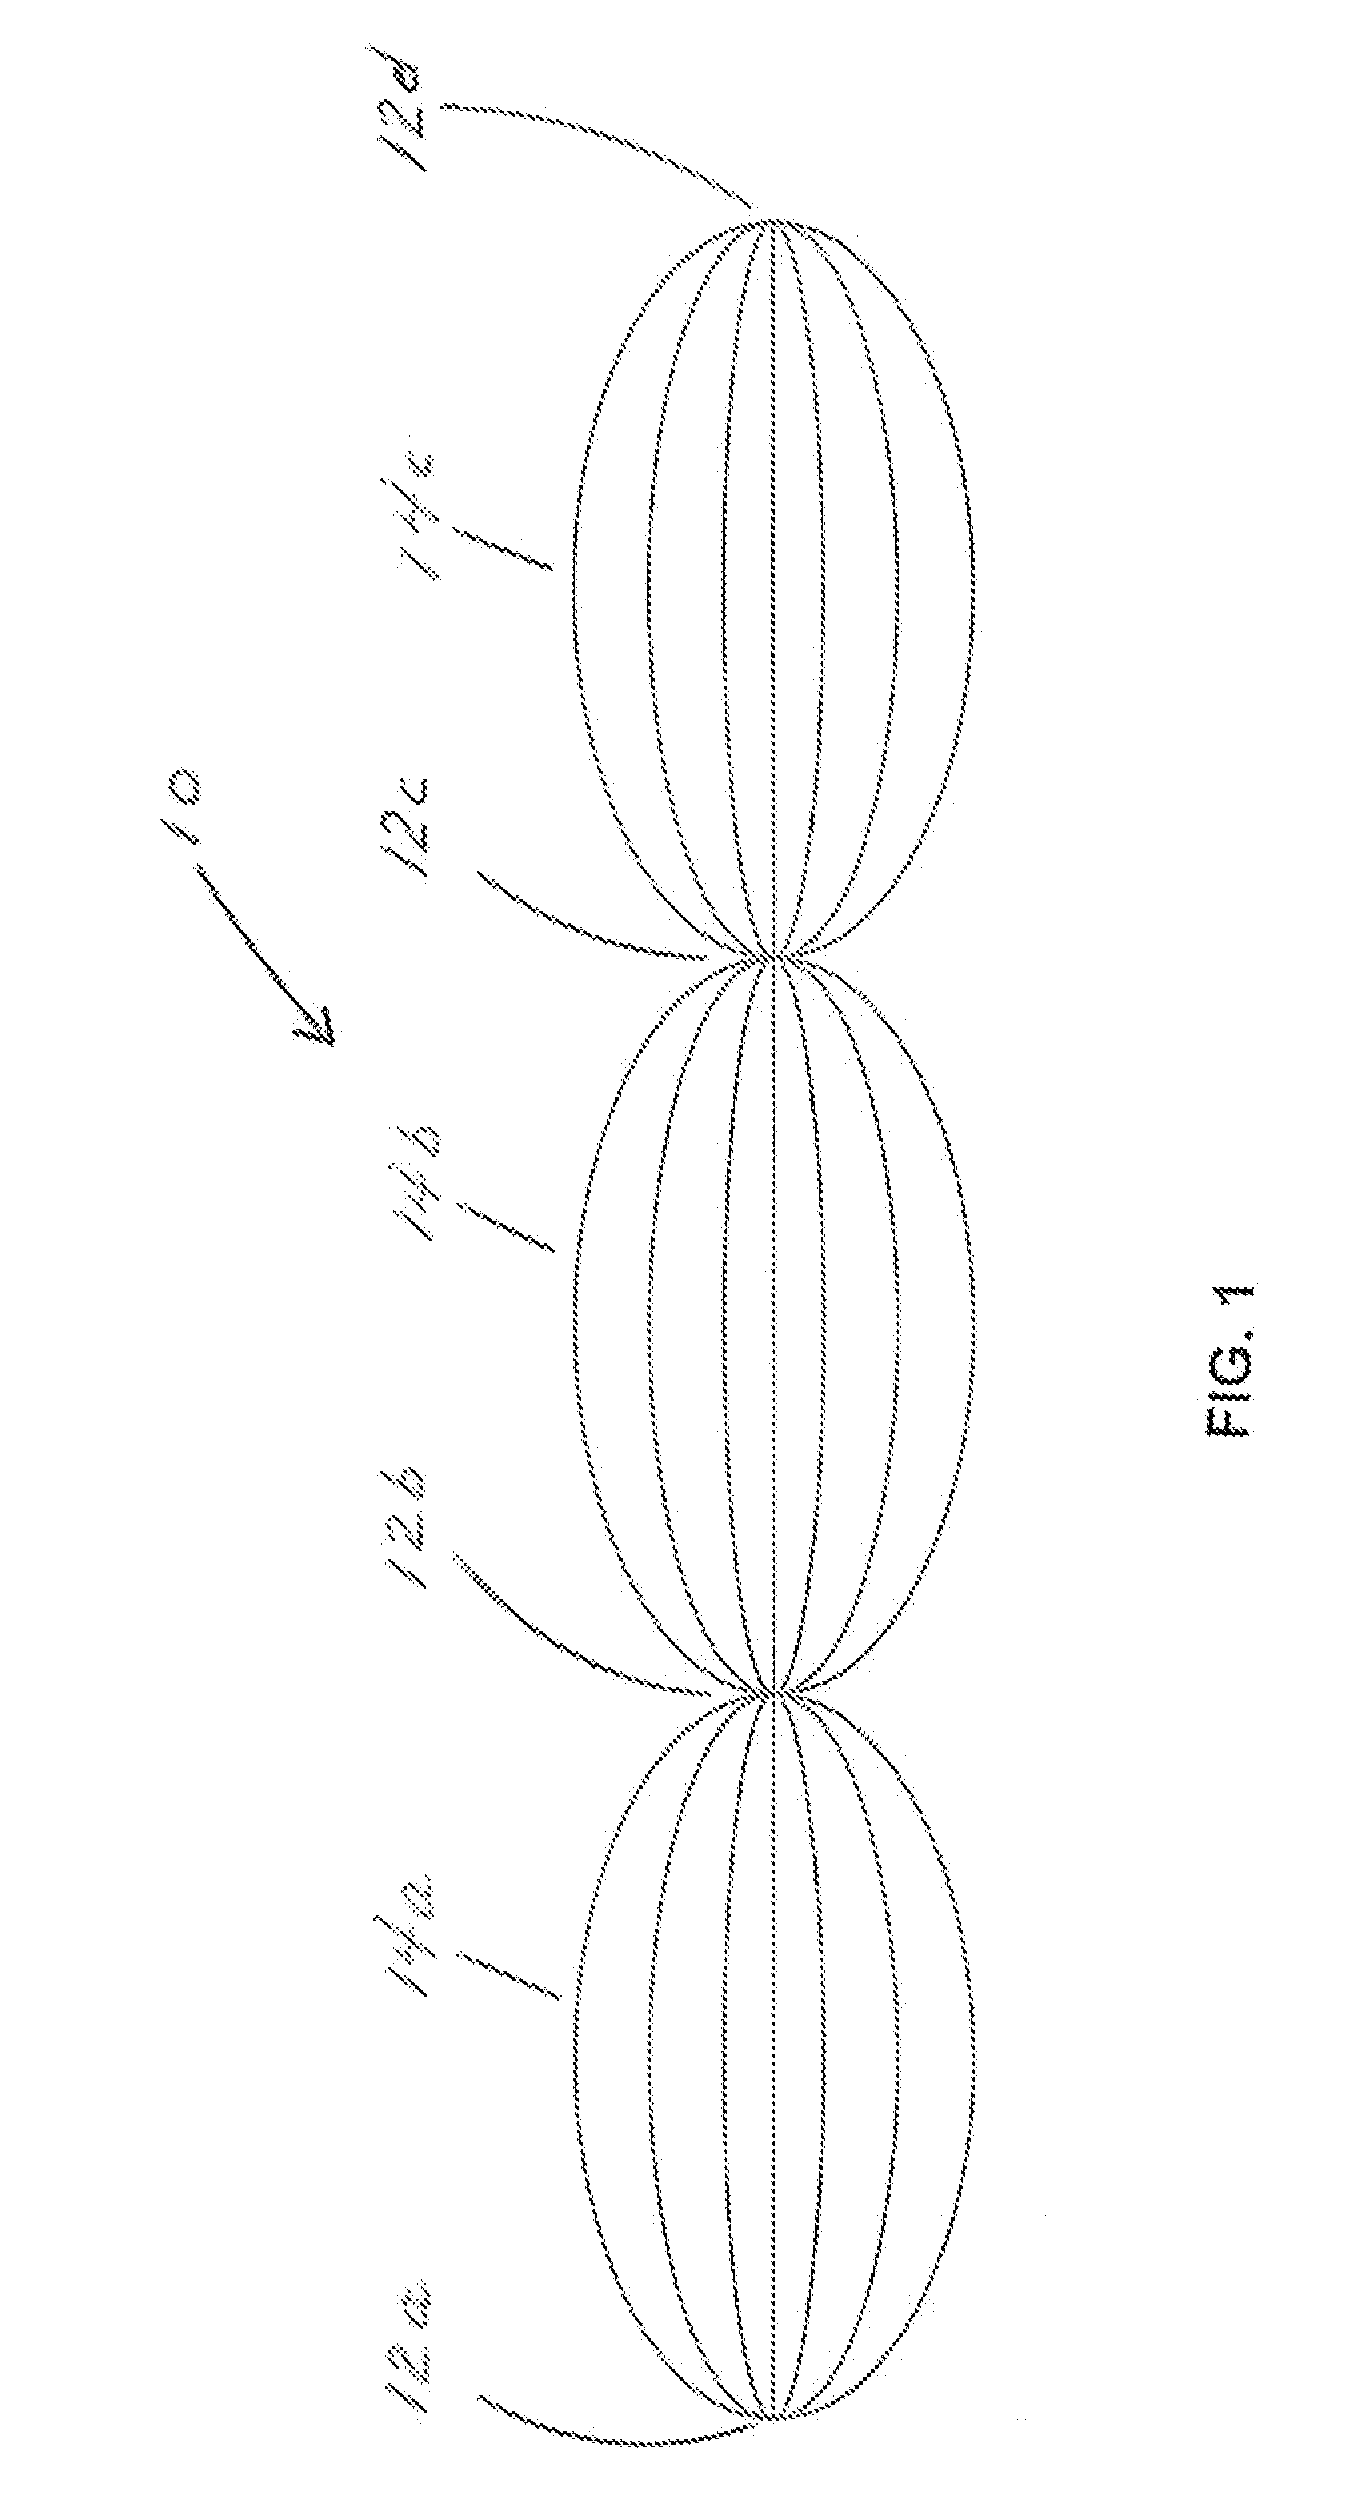 Apparatus and method for separation of particles suspended in a liquid from the liquid in which they are suspended